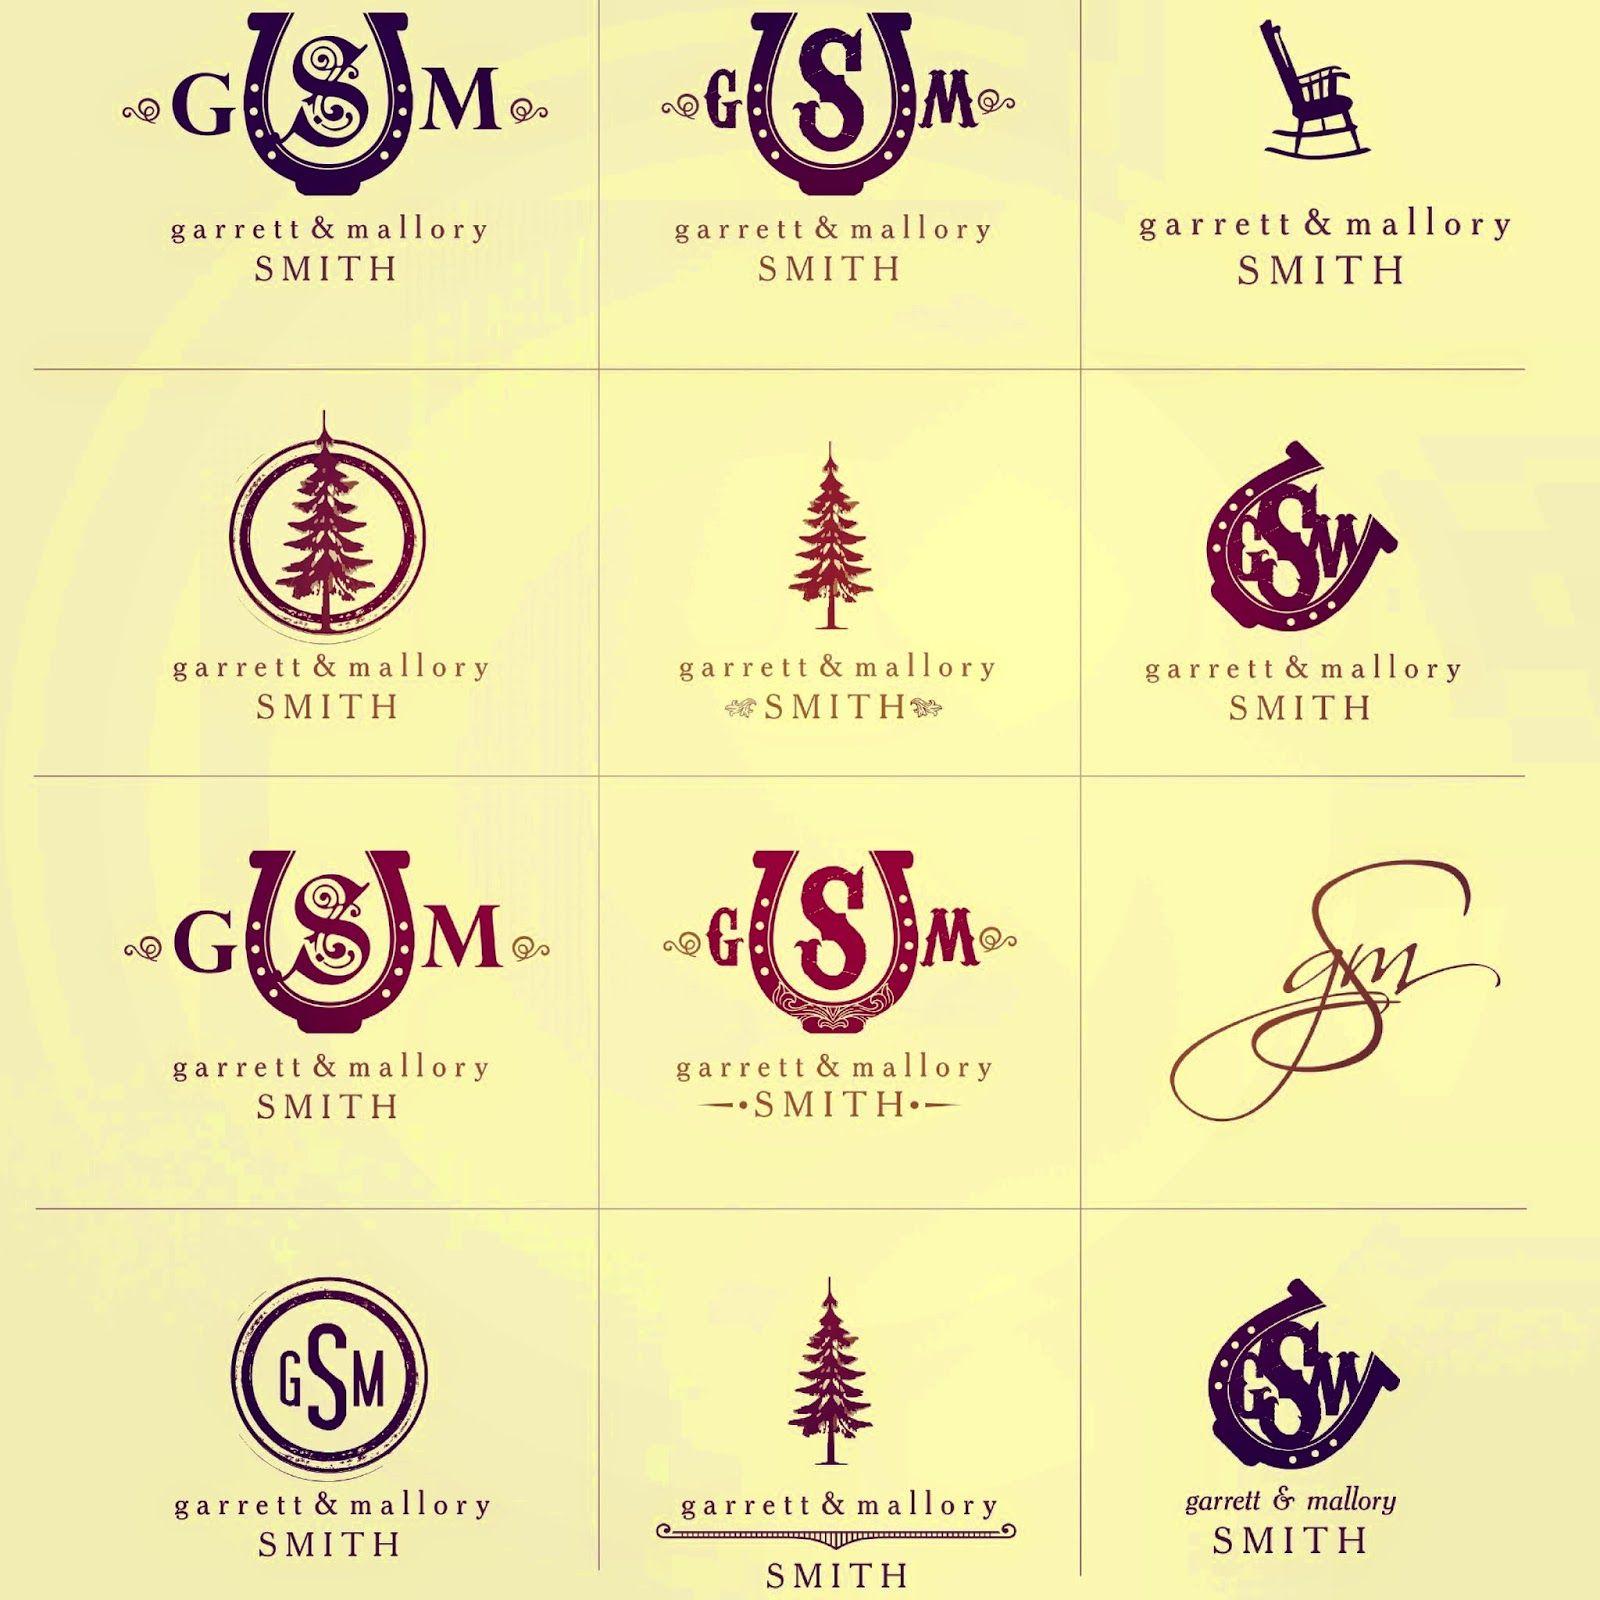 Rustic Country Logo - Theron's College Fund via Invitations and all Things Crafty: Wedding ...